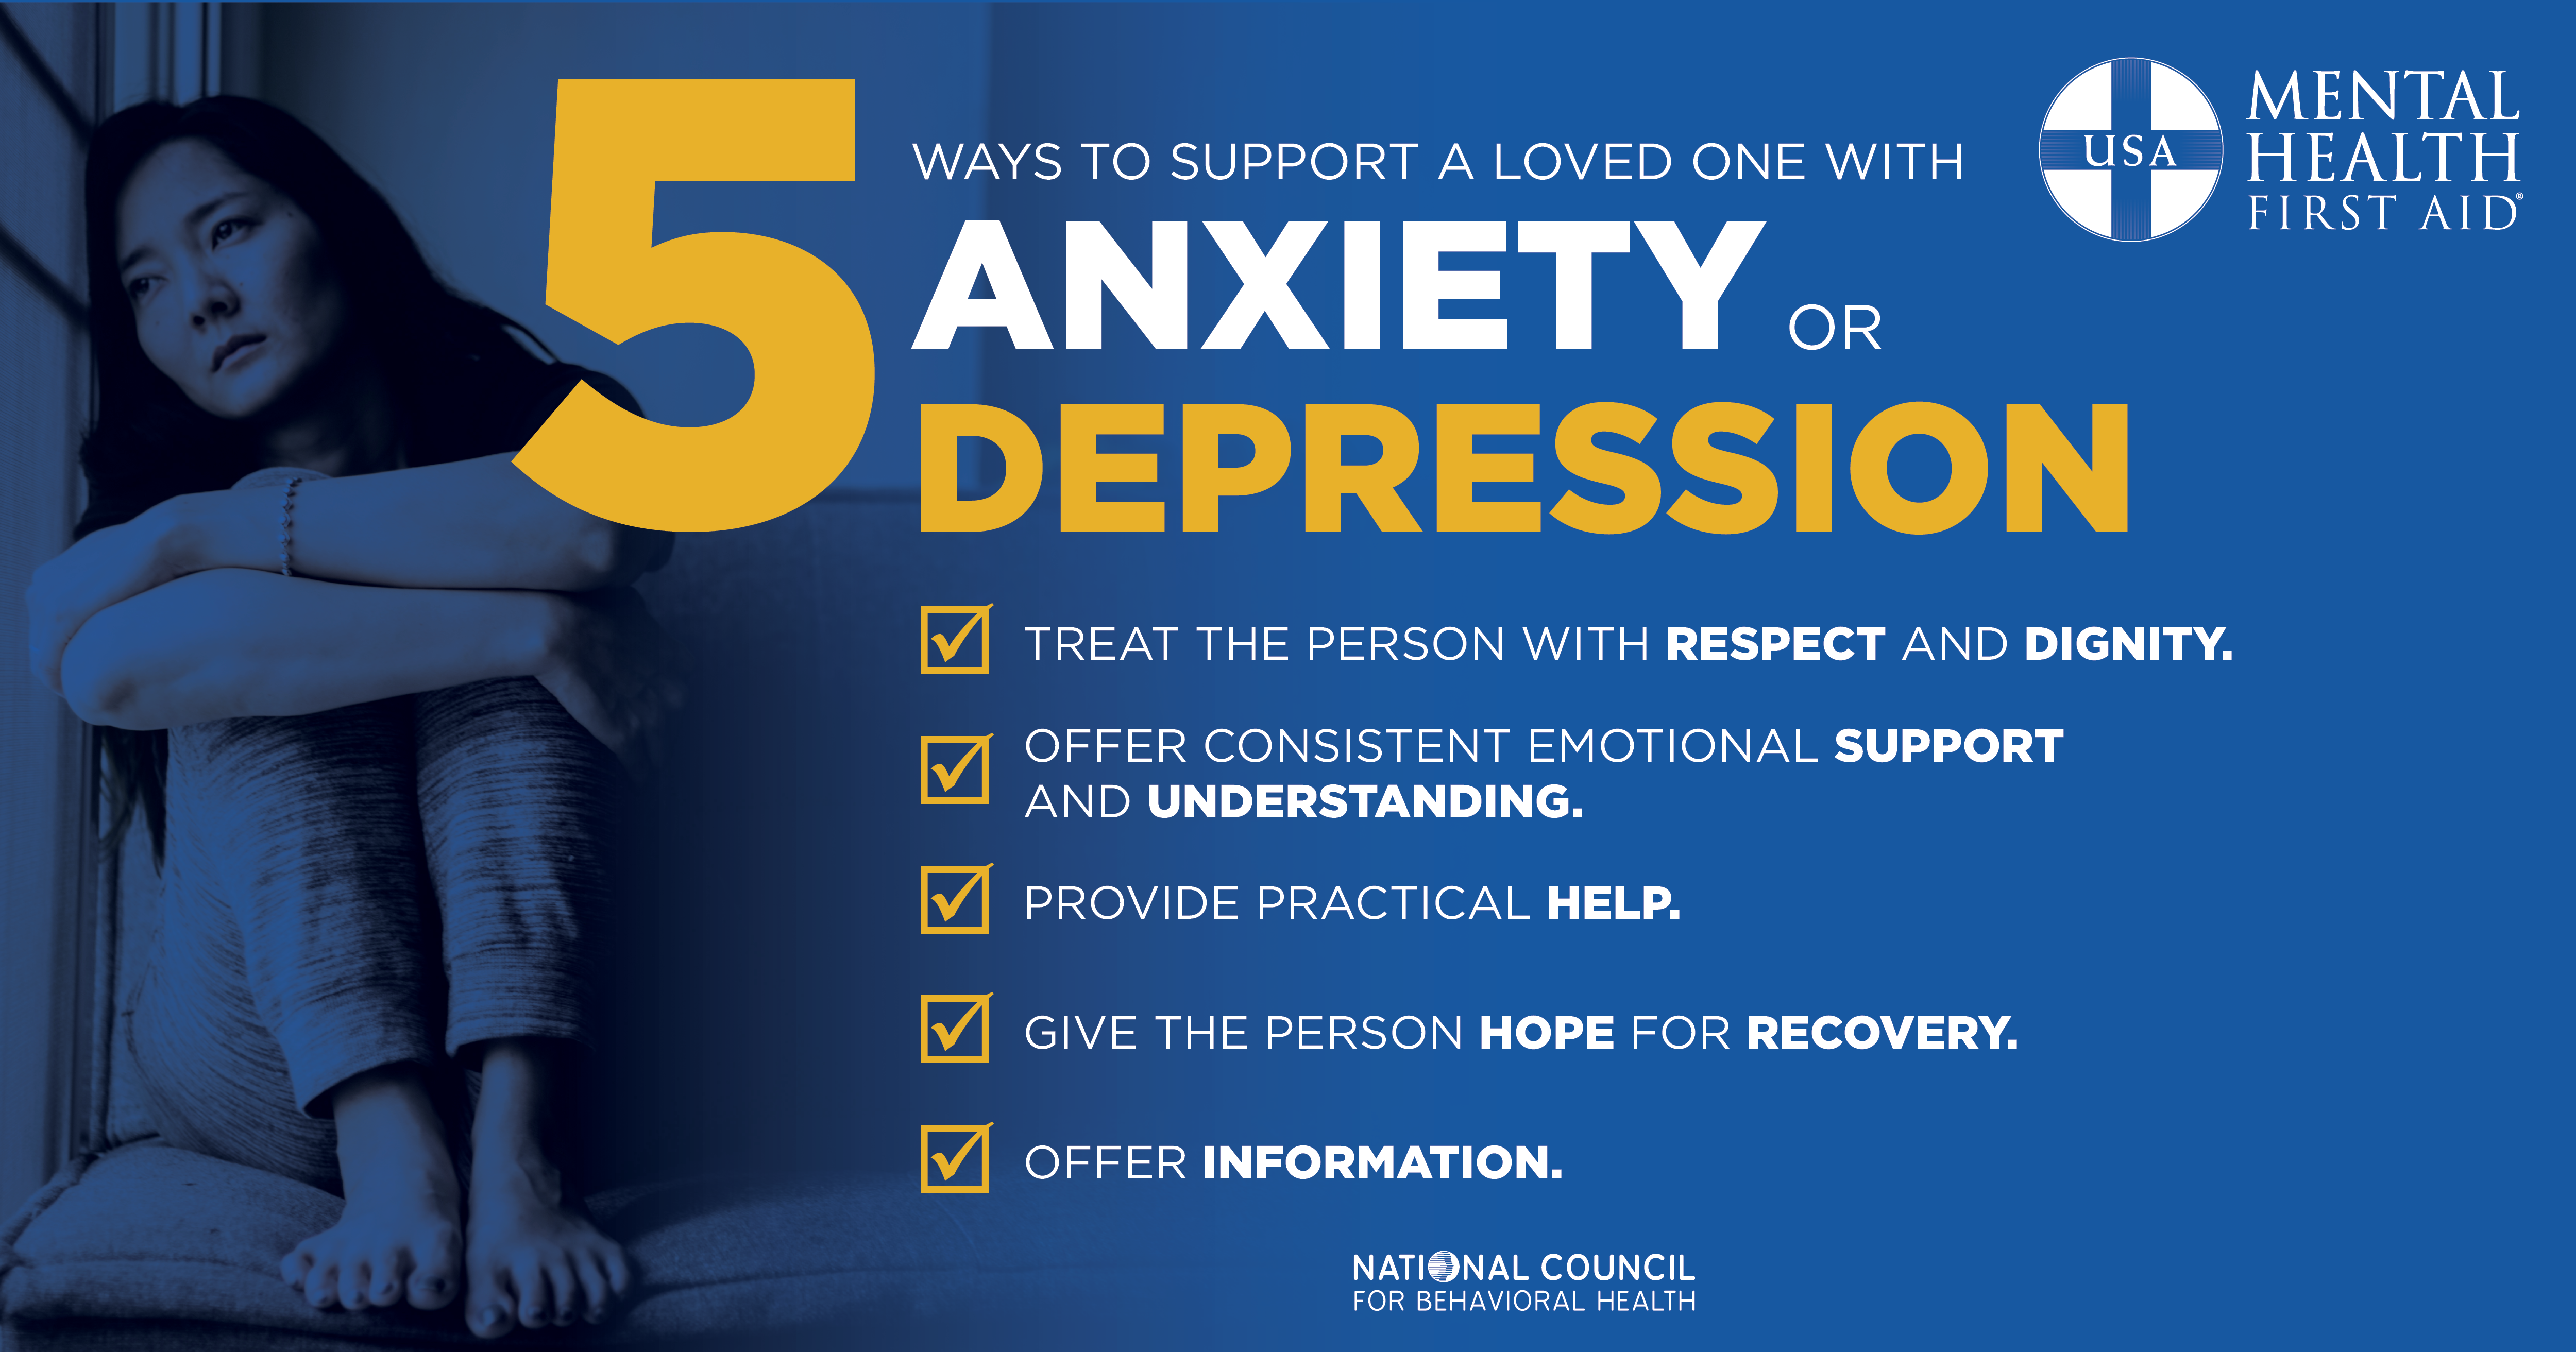 Five Ways to Support a Loved One with Anxiety or Depression